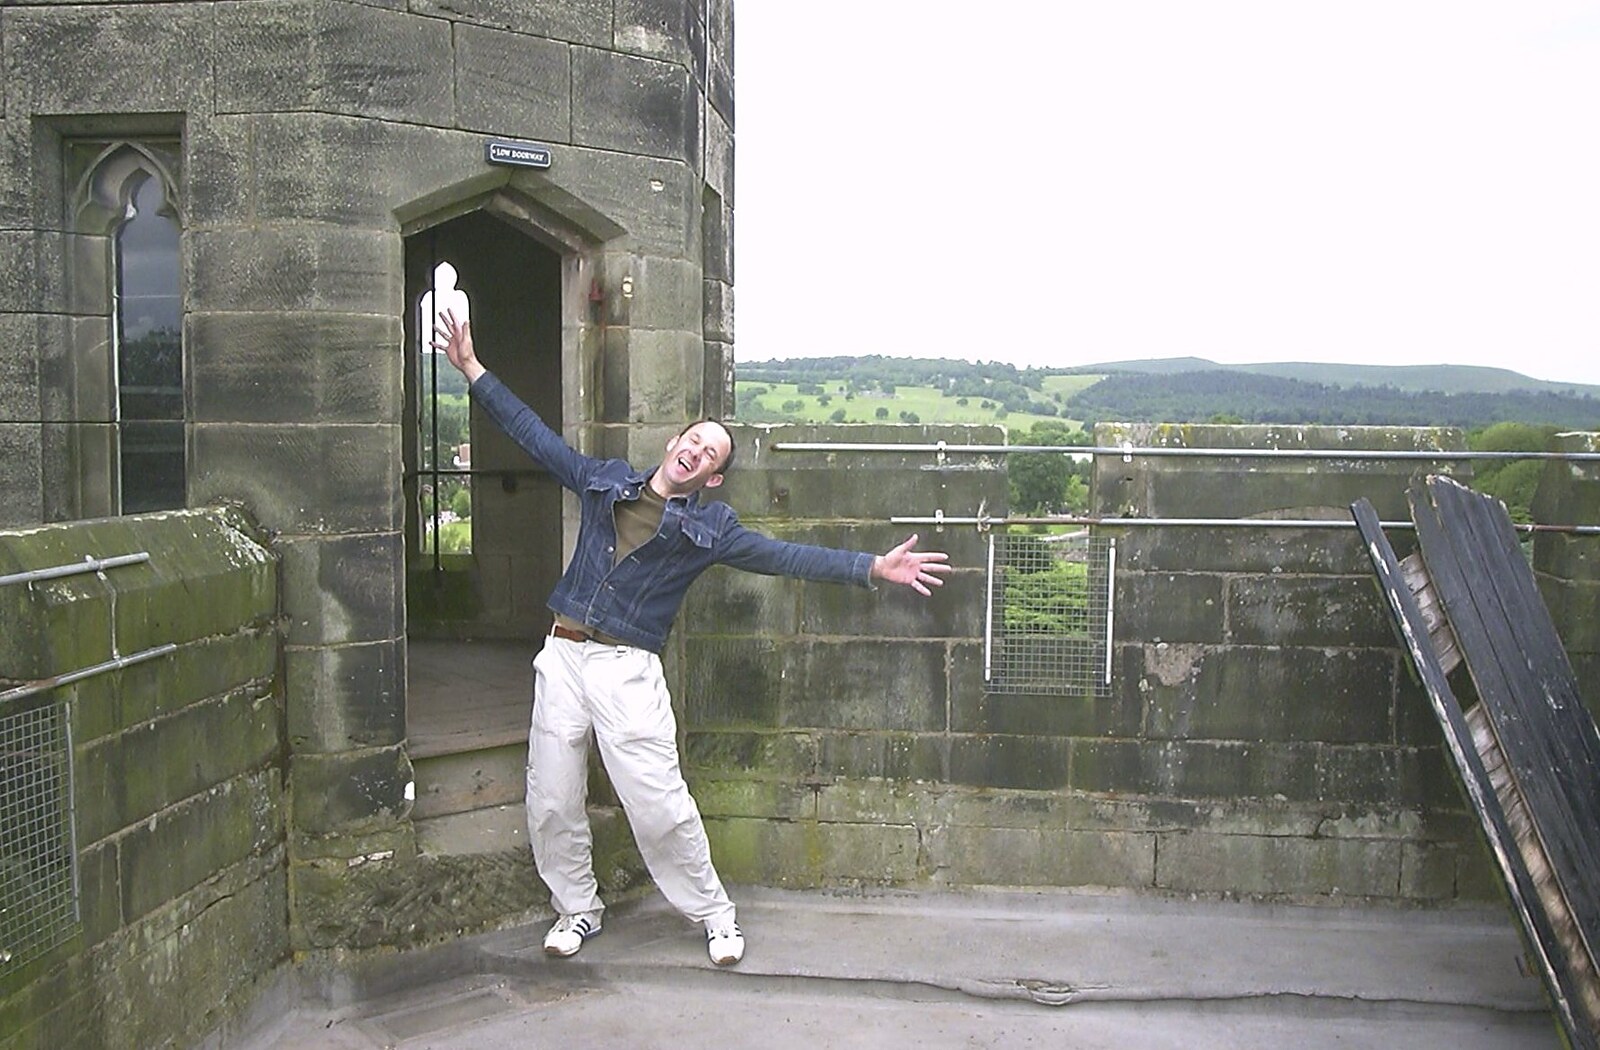 A Trip to Alton Towers, Staffordshire - 19th June 2004: DH does jazz hands